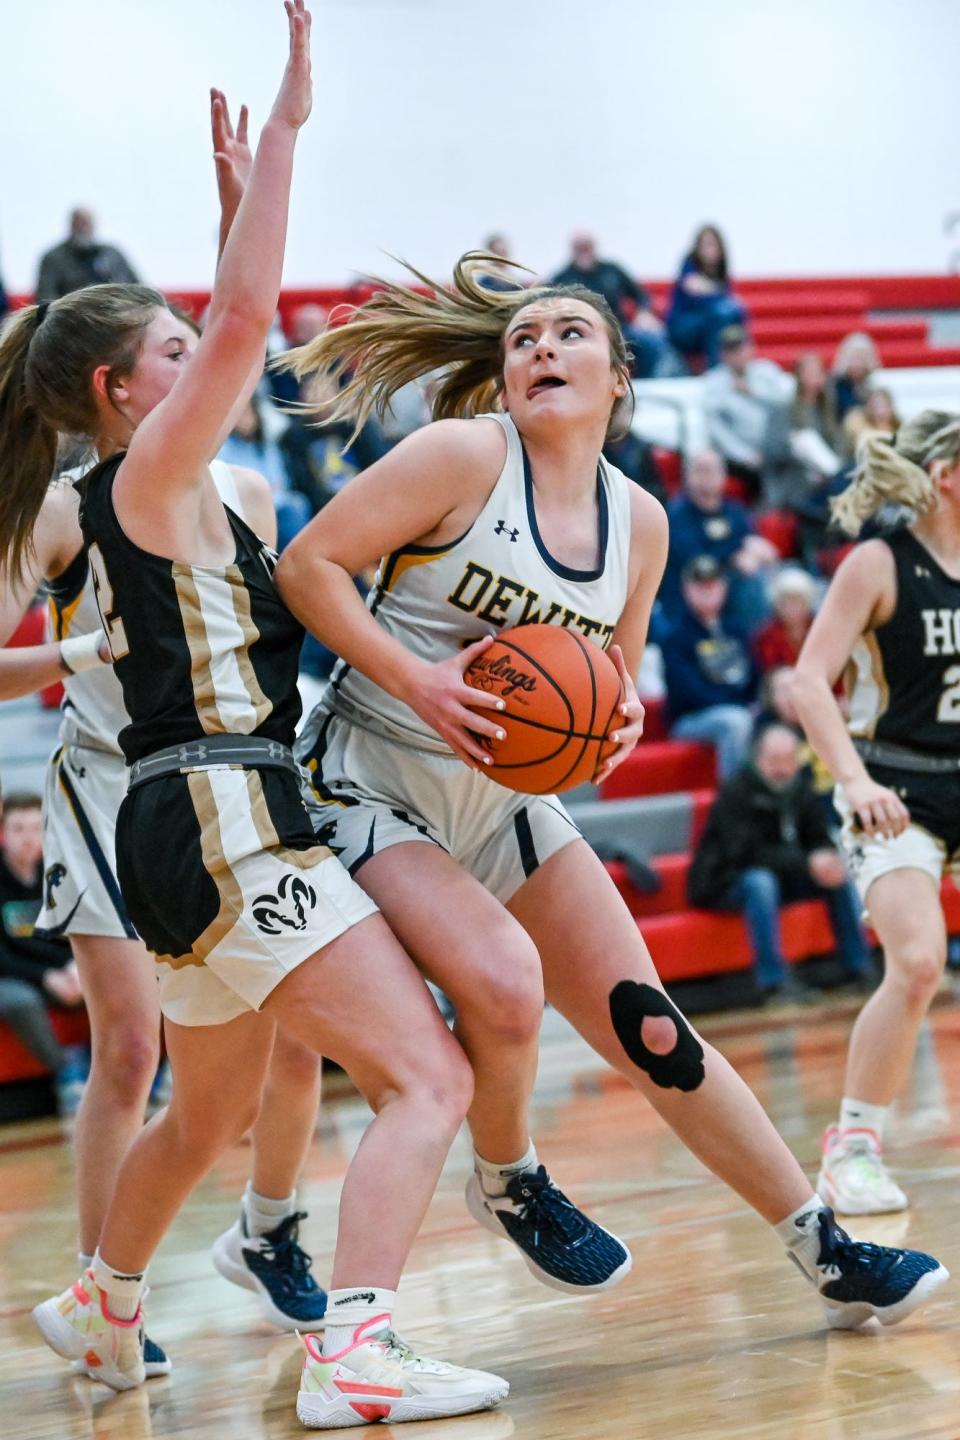 DeWitt's Carly Dennis, right, moves to the basket as Holt's Abigail Metzger defends during the second quarter on Thursday, March 9, 2023, at Coldwater High School.